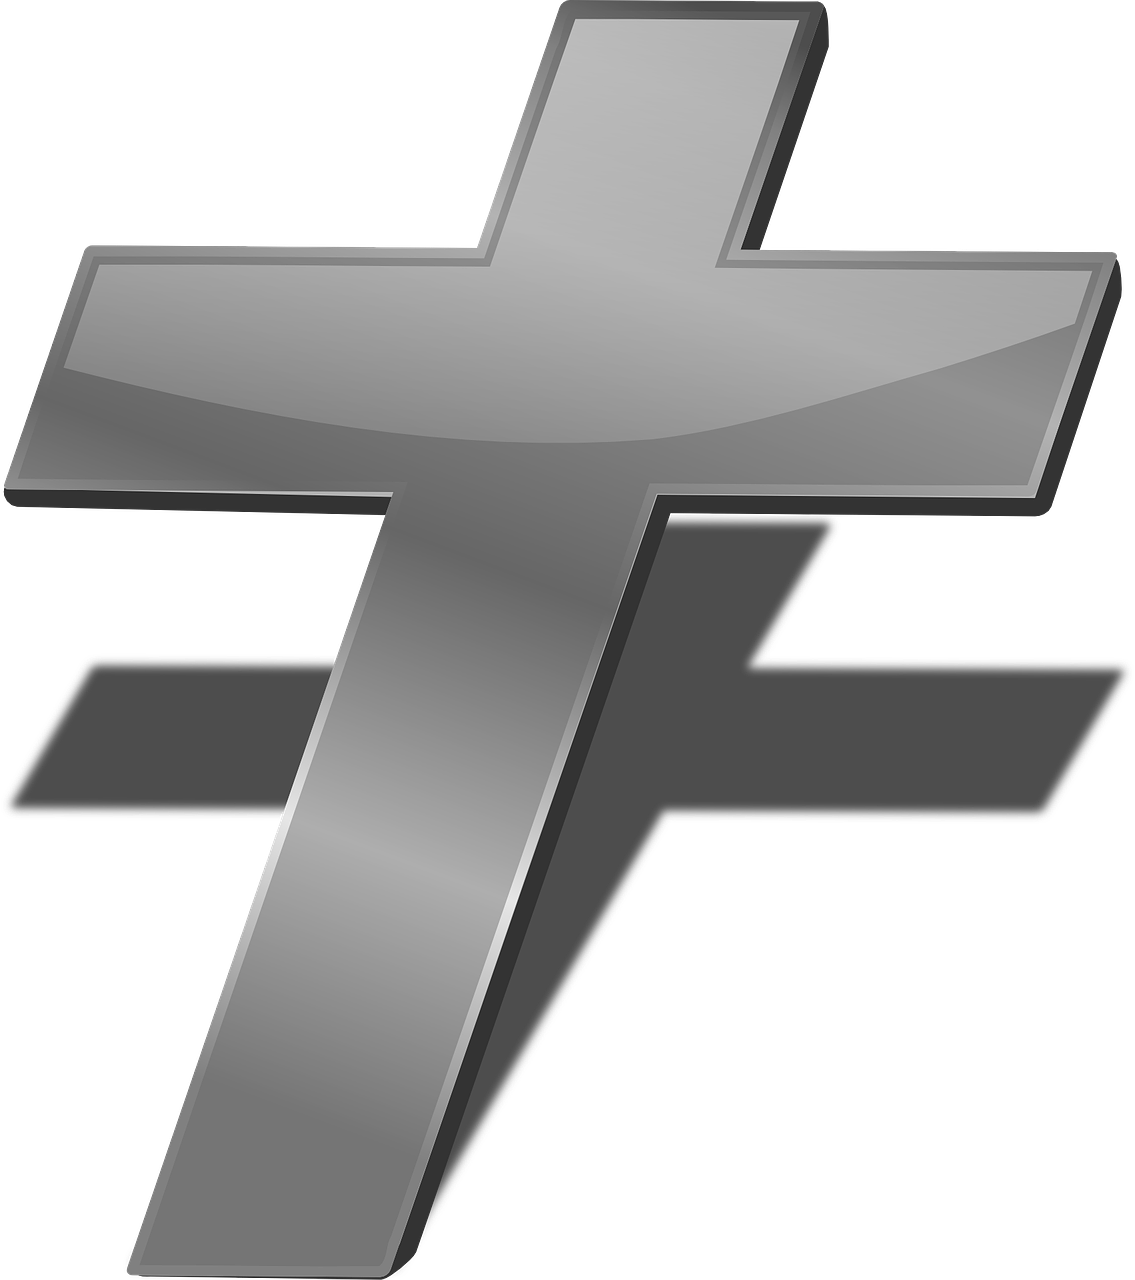 A Silver Cross On A Black Background